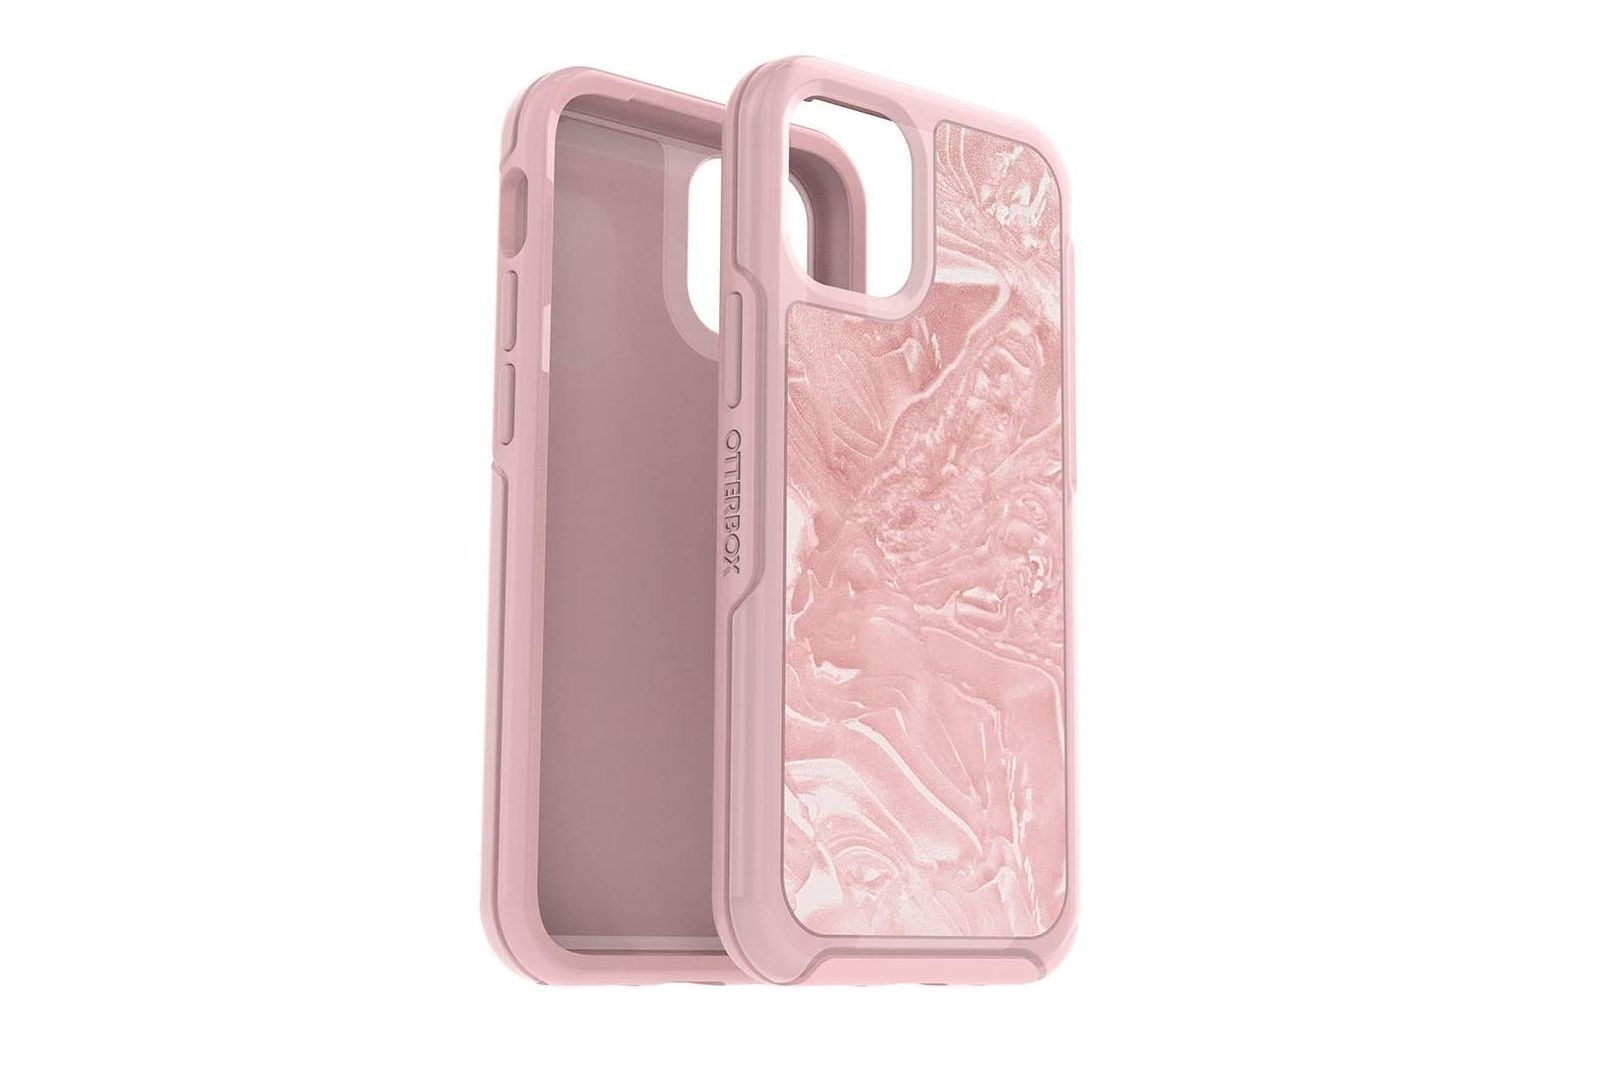 OtterBox Symmetry Clear Series iPhone 12 mini case - The best iPhone 12 mini cases you can get - updated July 2022